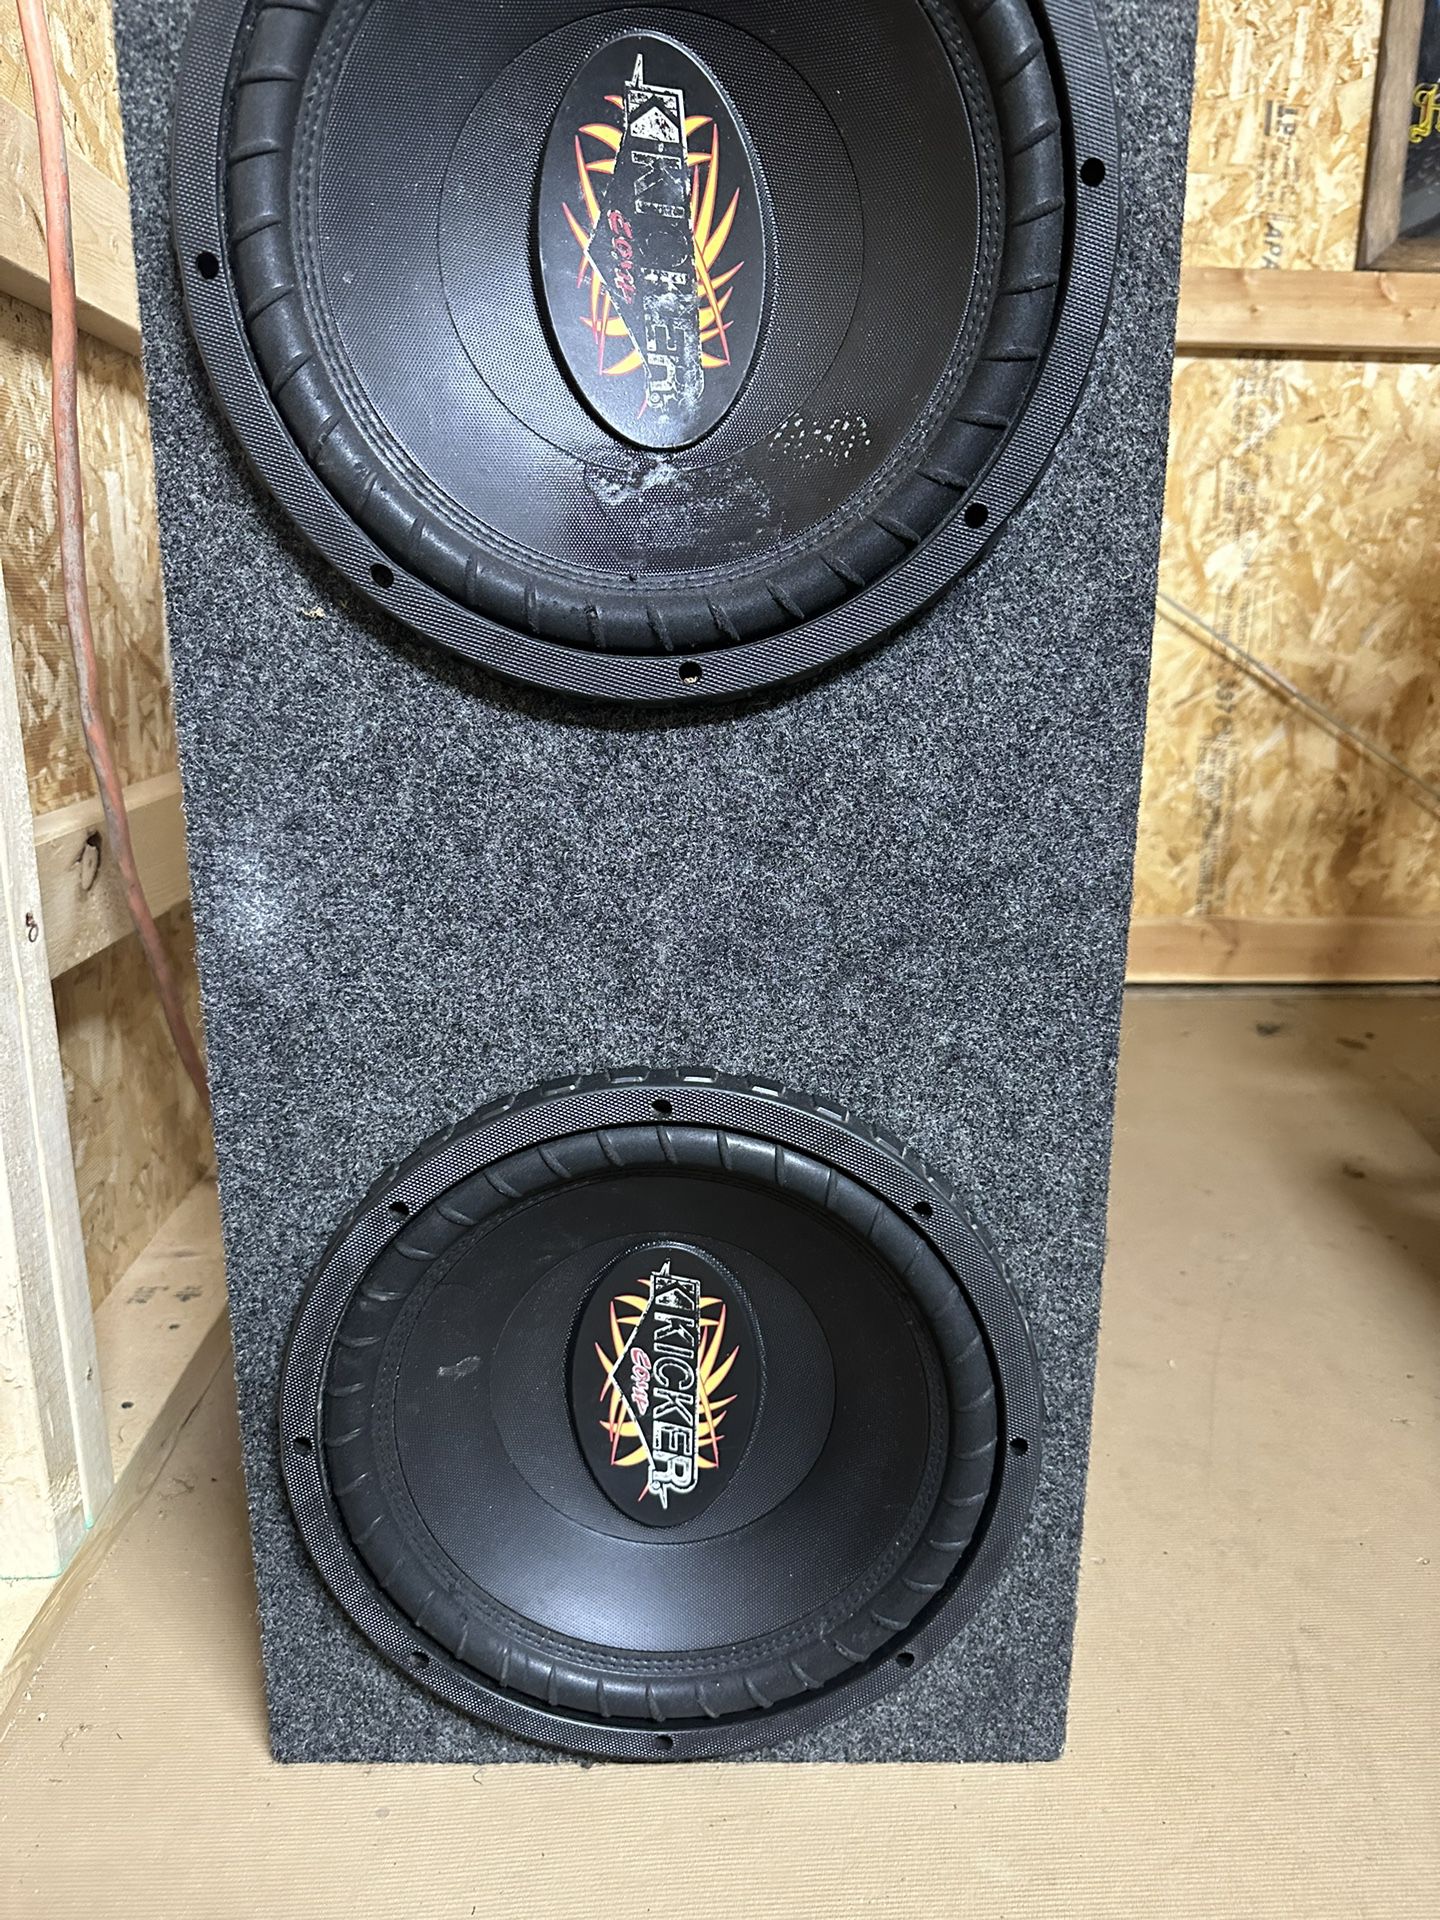 Subwoofers And Amp